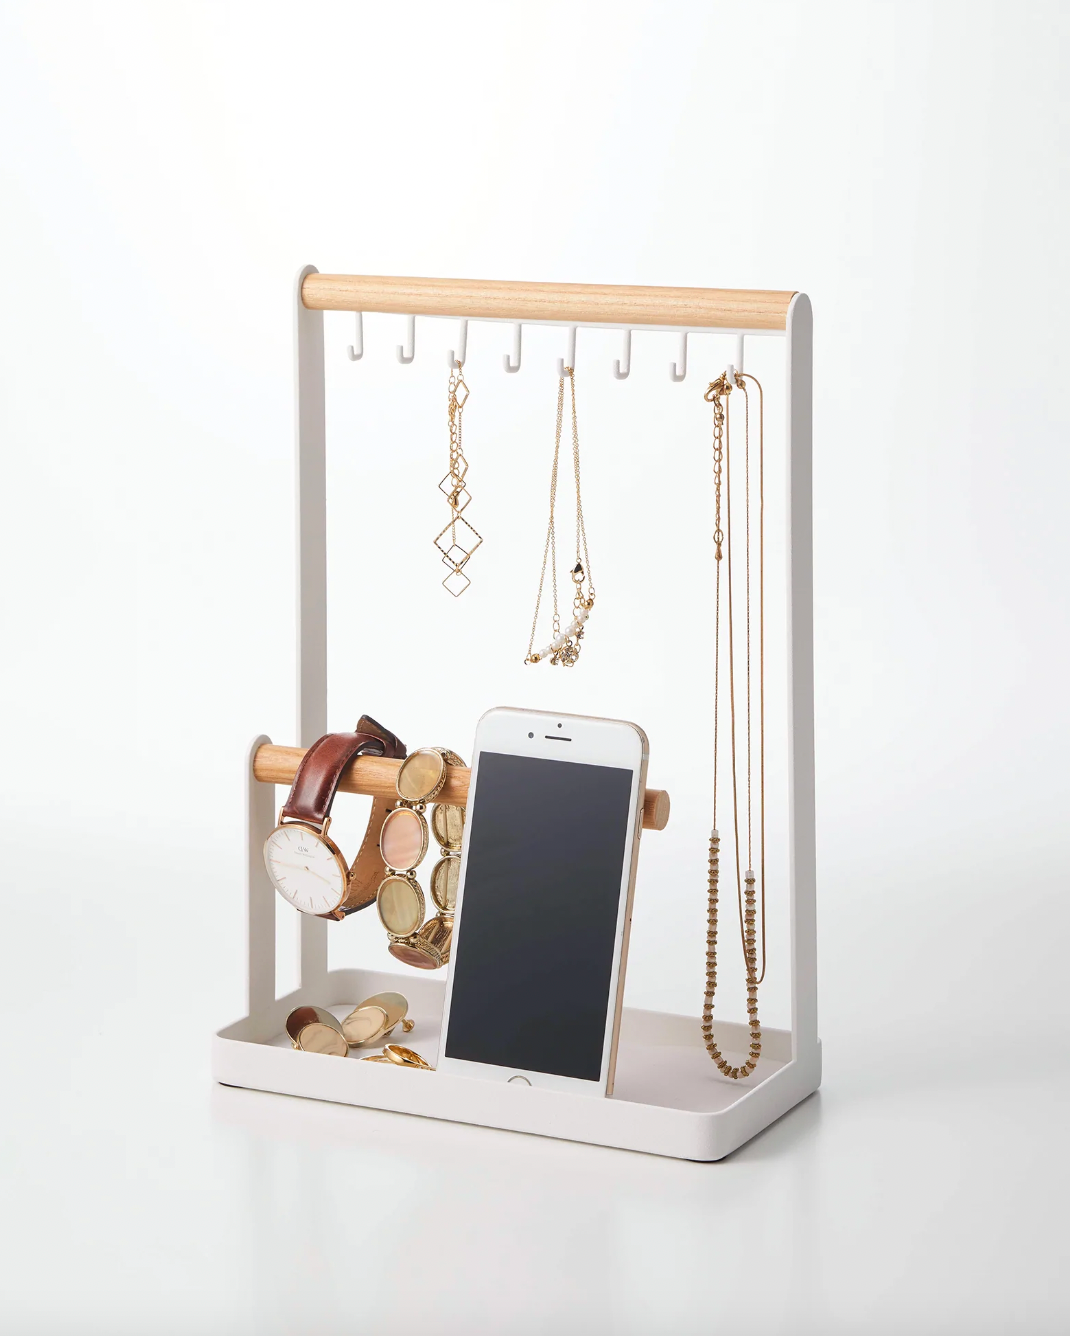 SILVER TESTING SOLUTION - Jewelry Display Inc